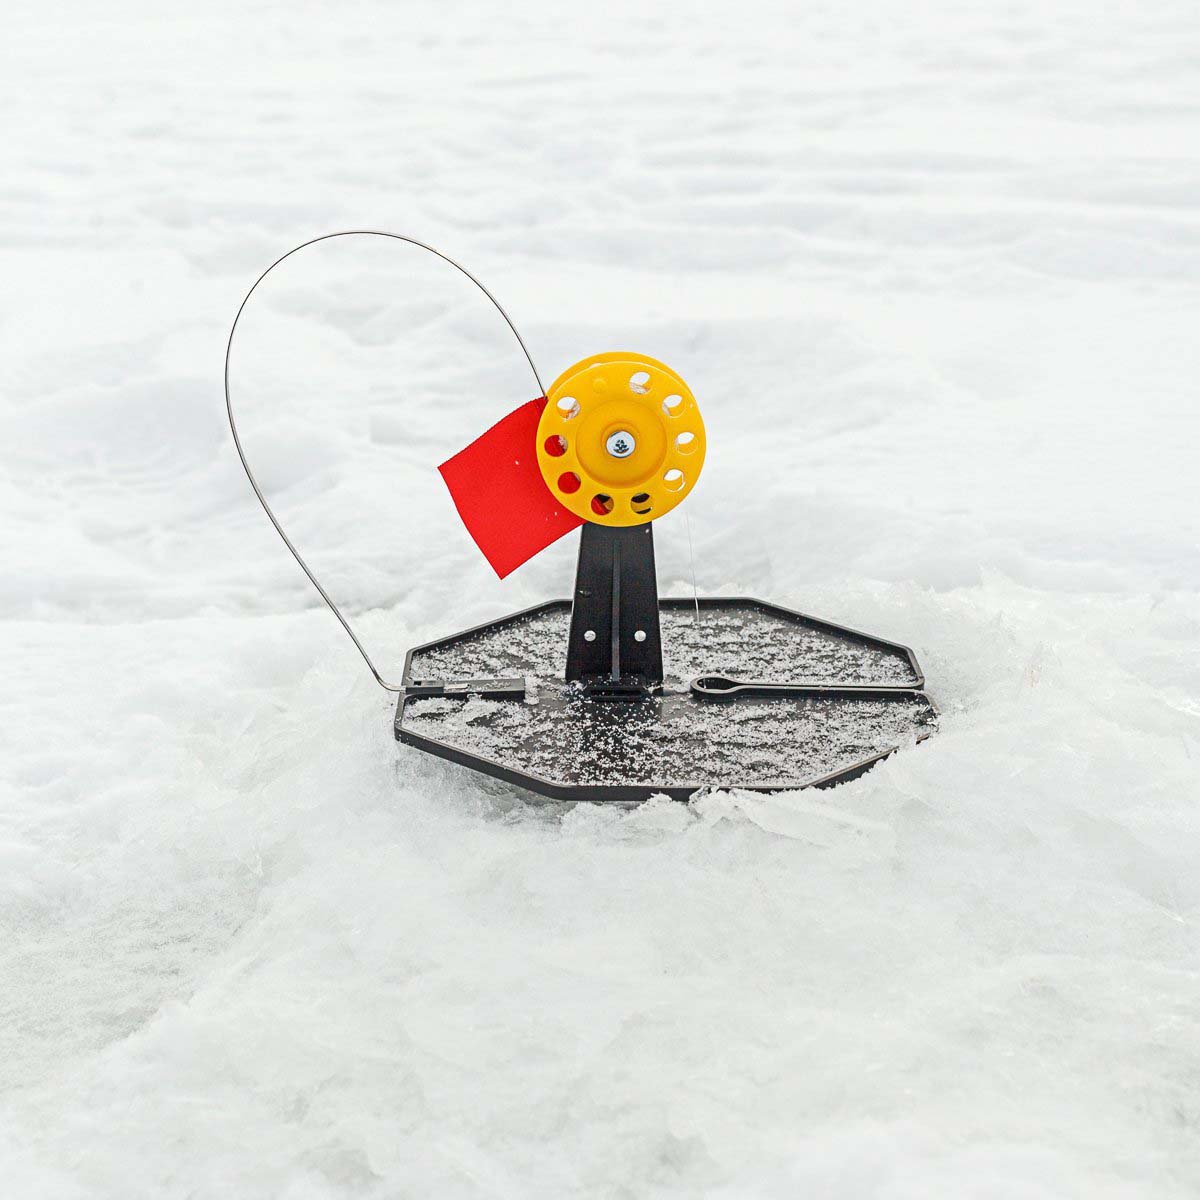 CLASSIC Manual Ice Auger & 10x Tip-Up Set for Ice Fishing